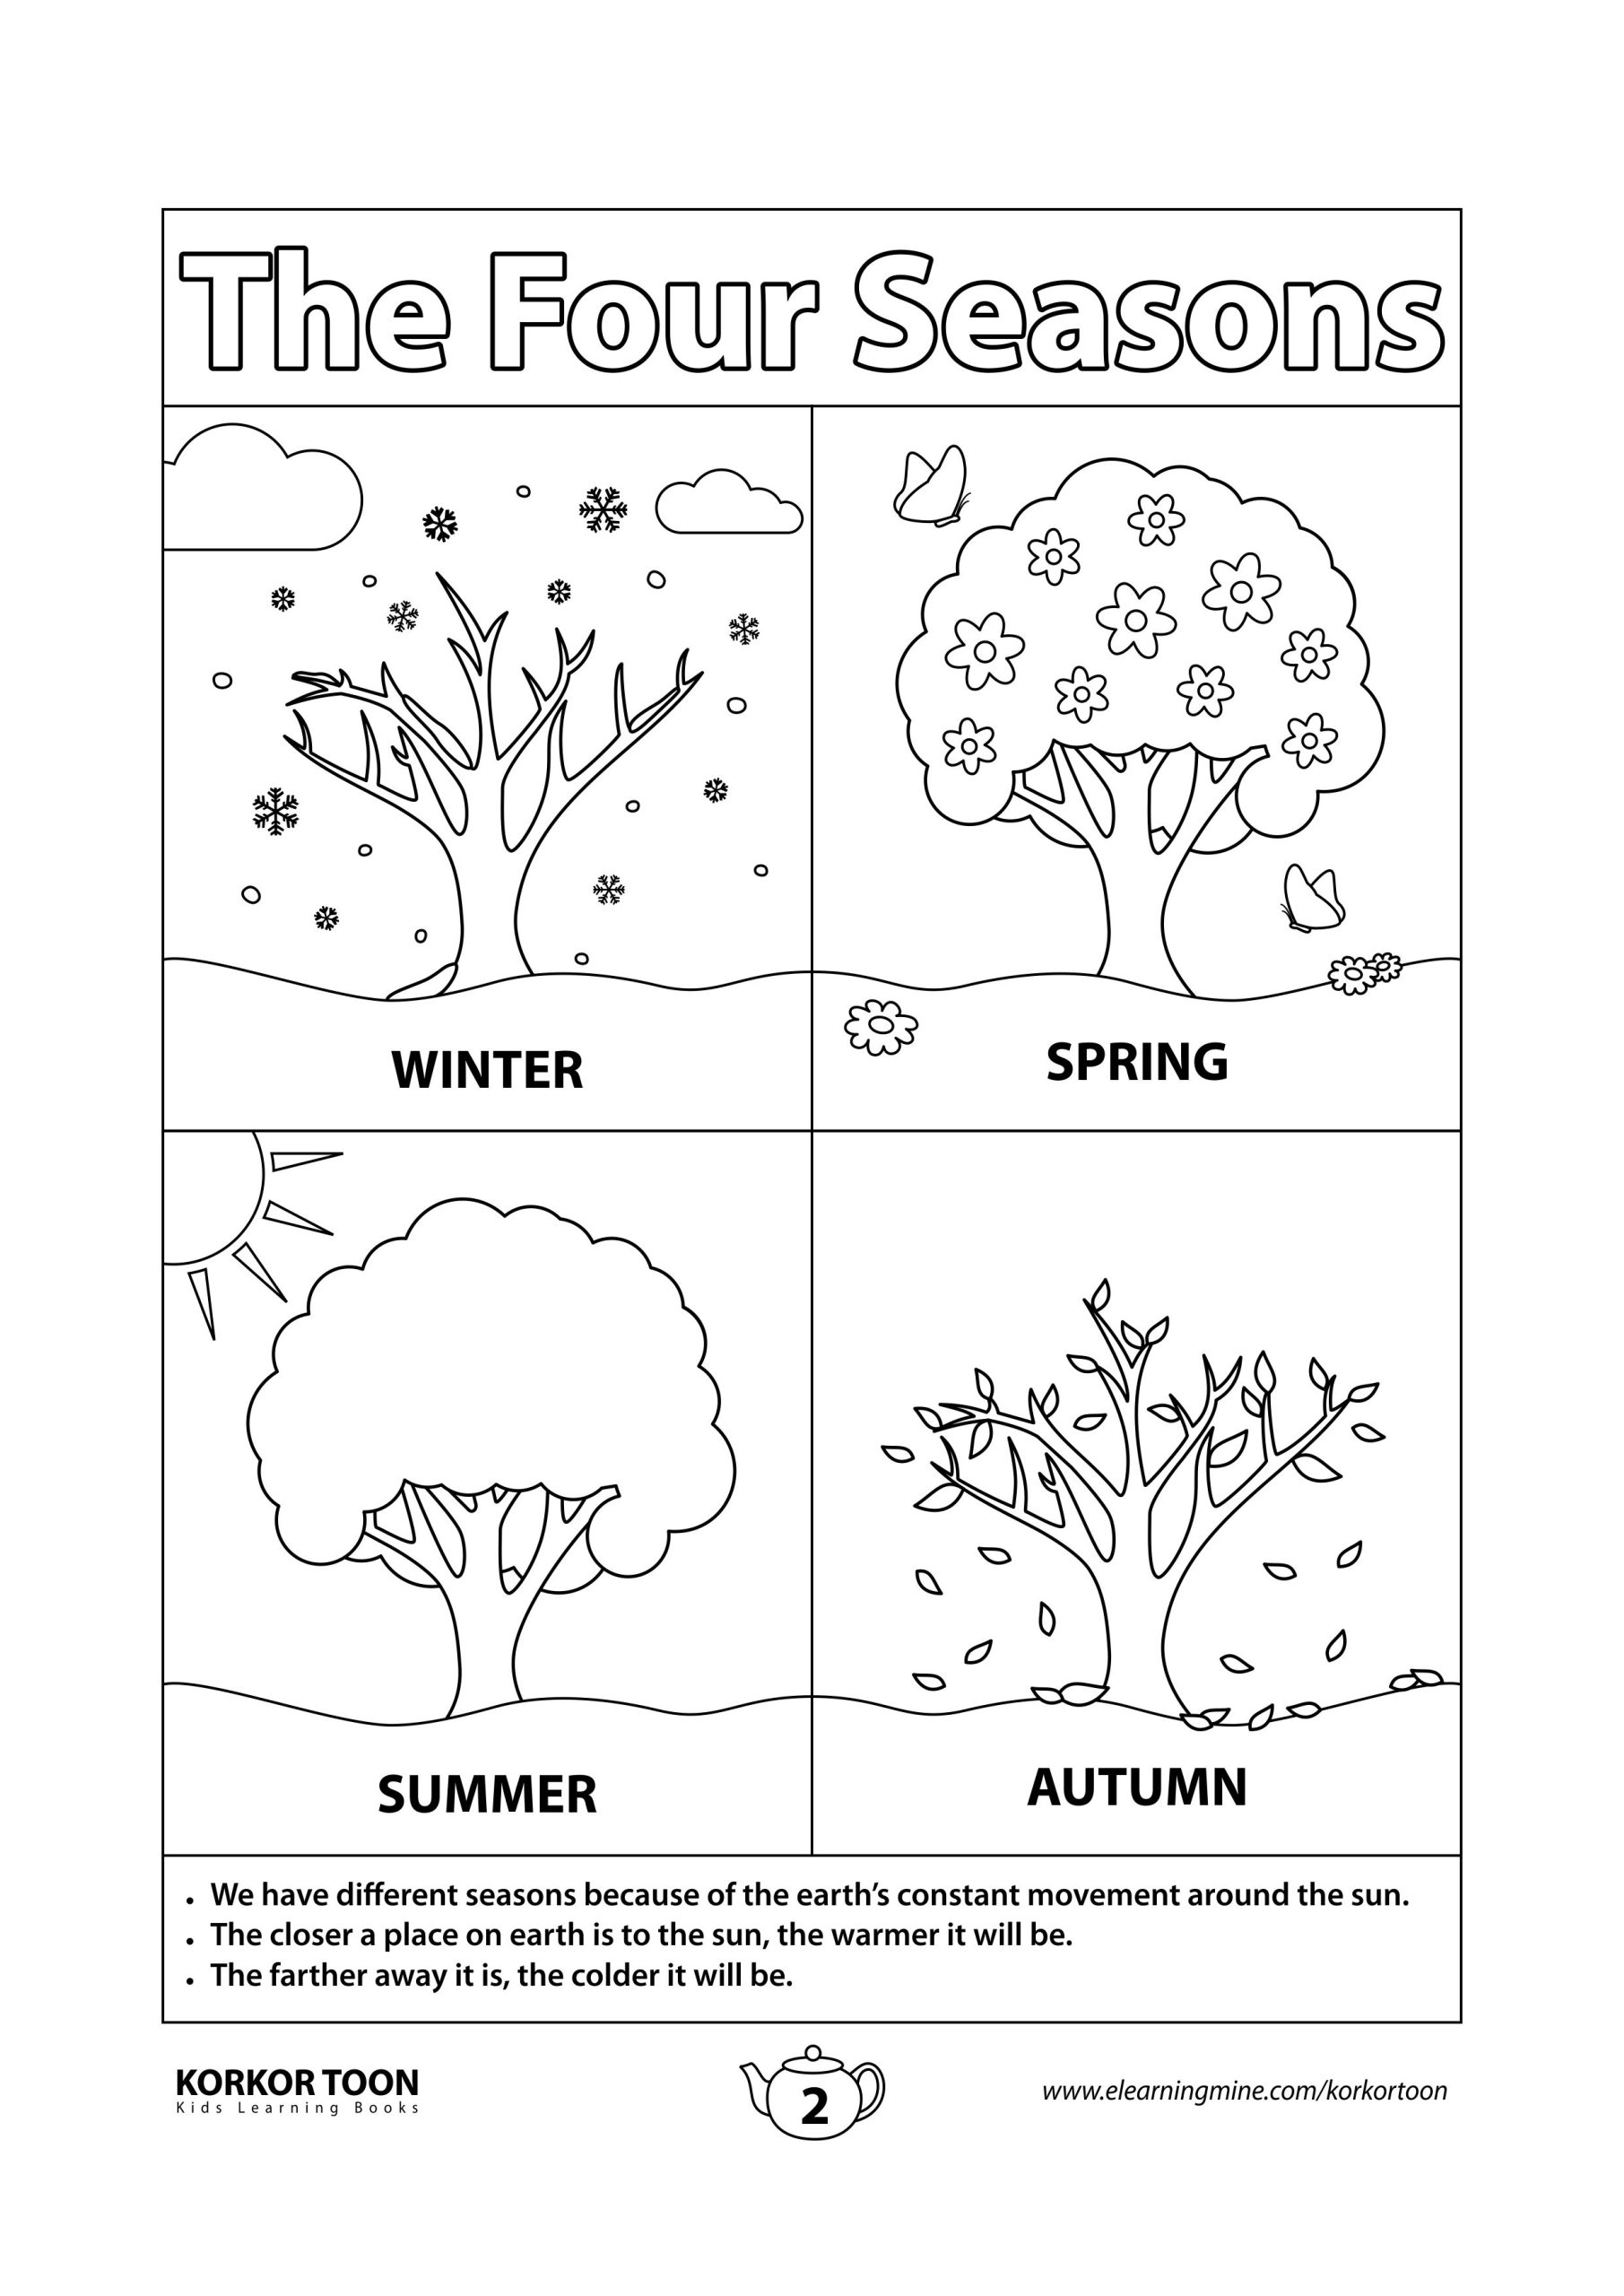 Seasons Coloring Book for Kids | The Four Seasons Coloring Page